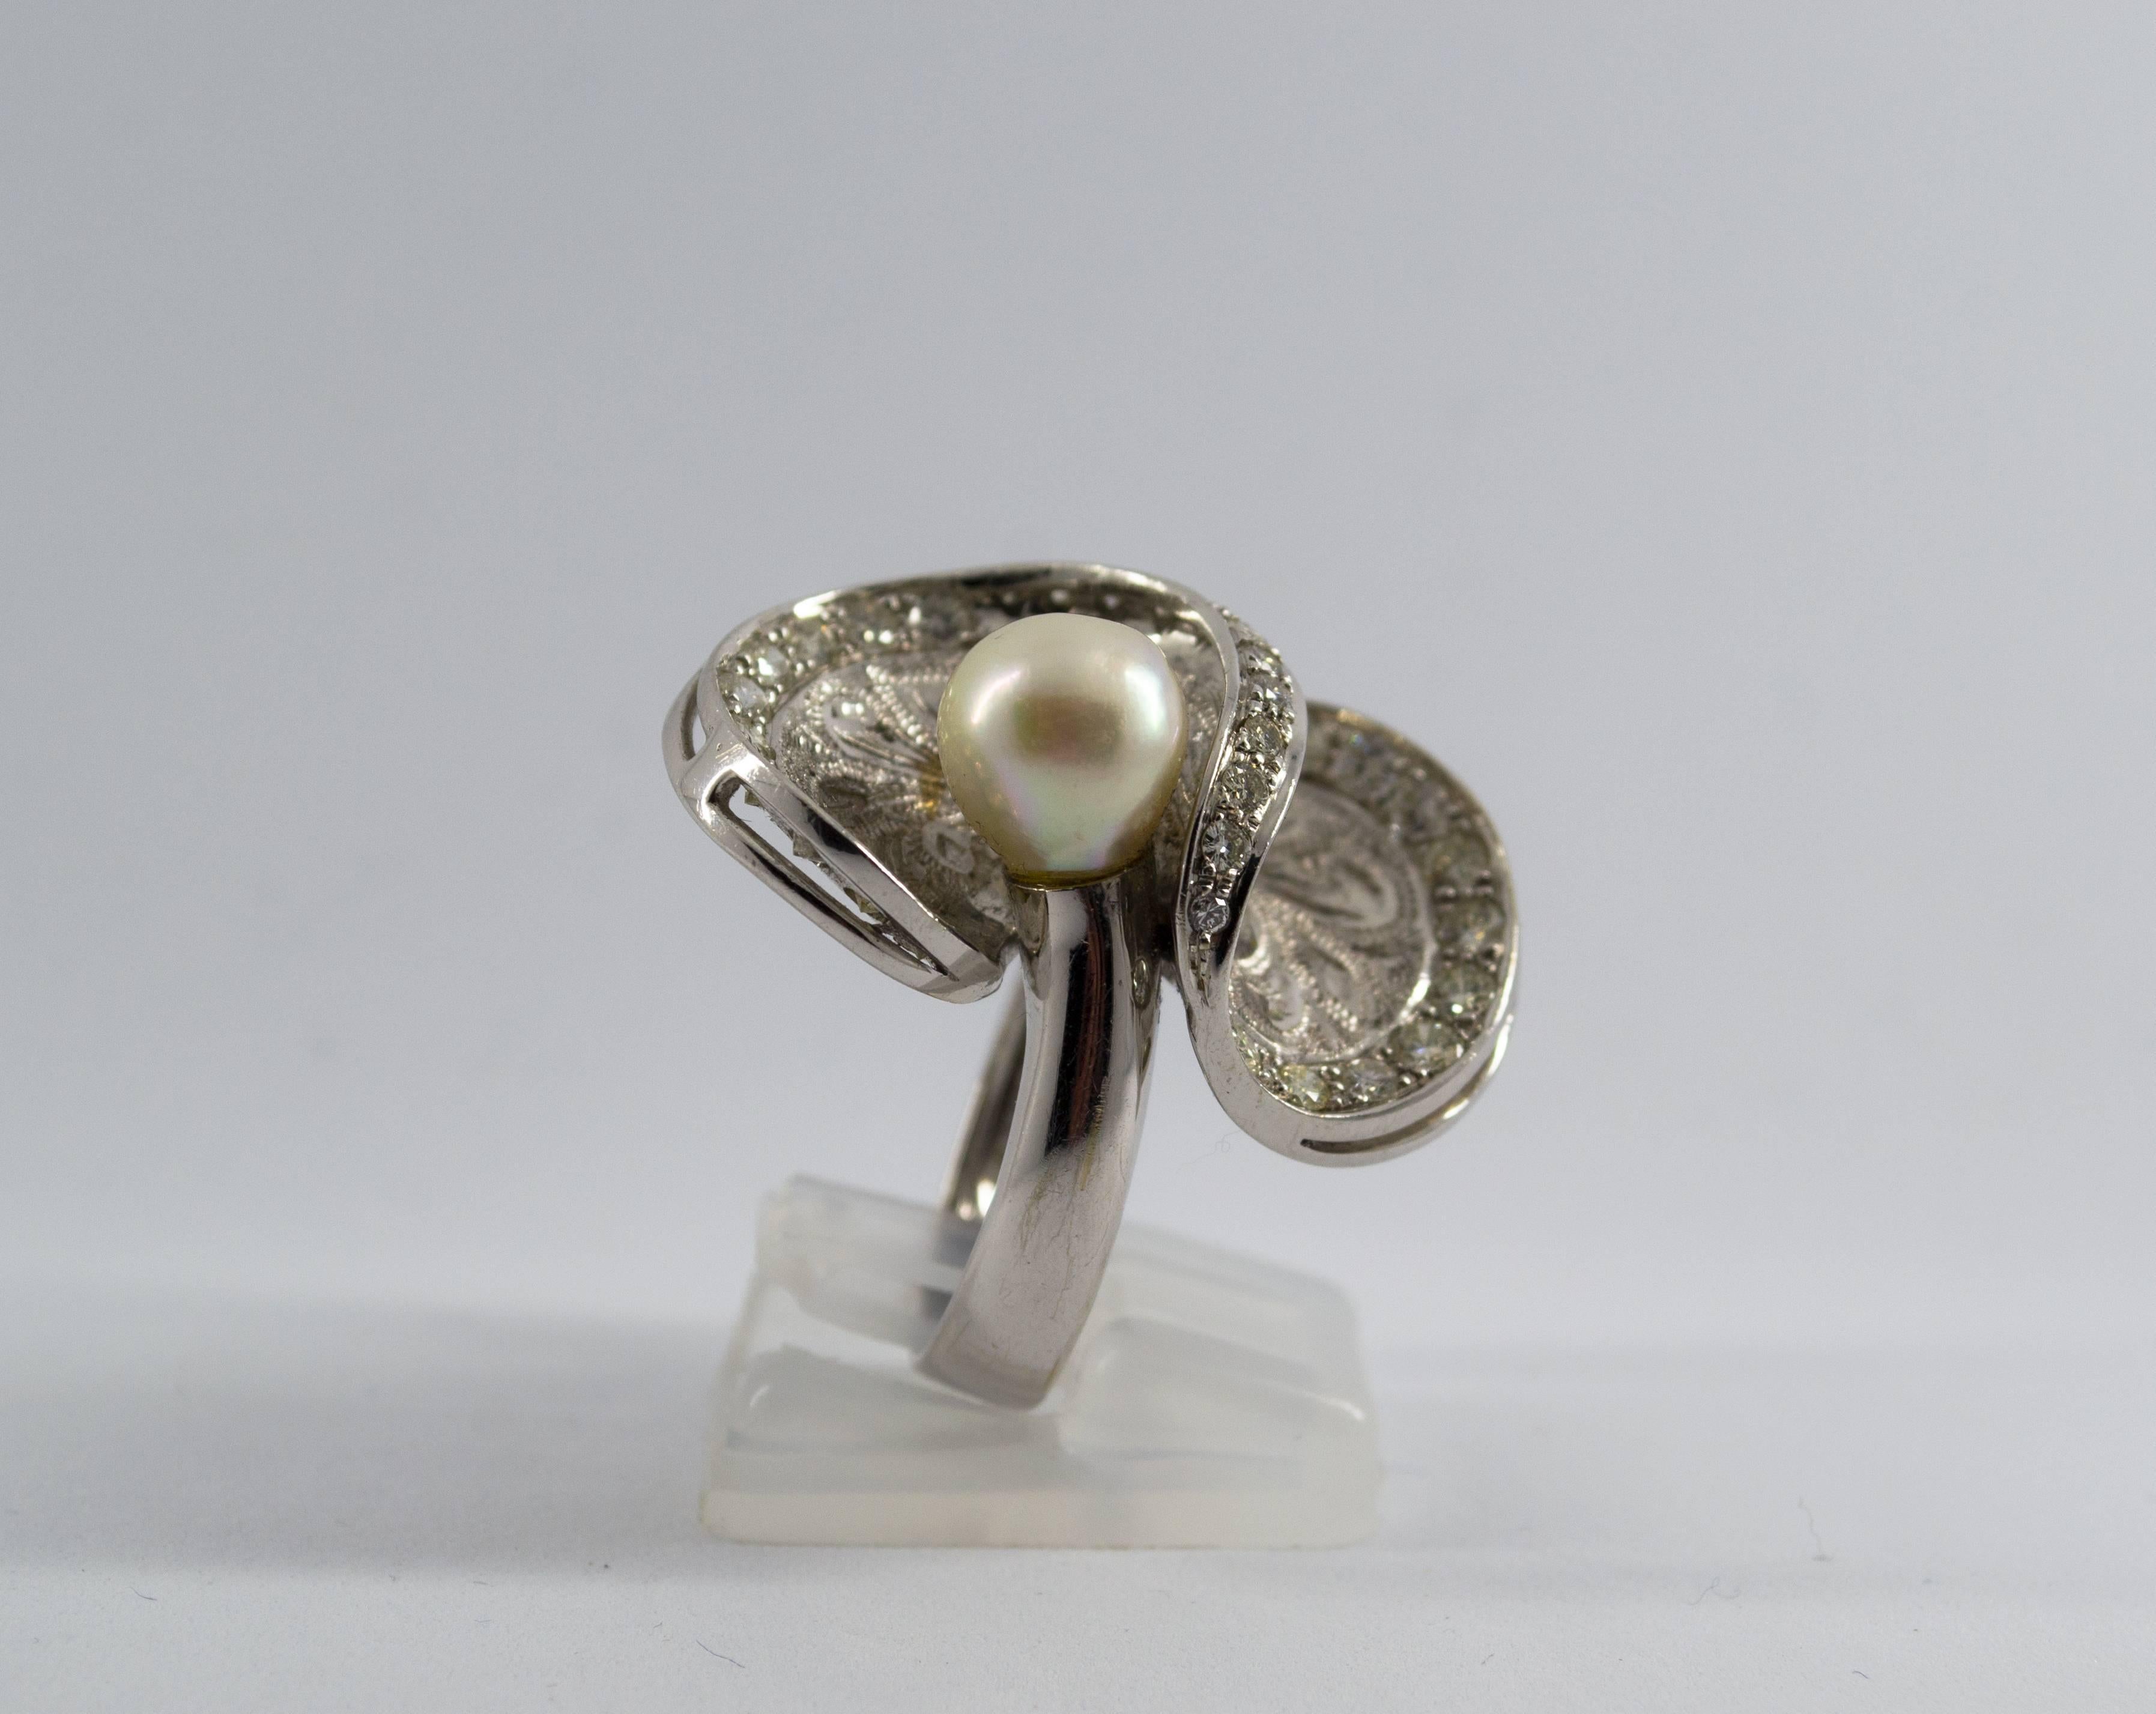 Brilliant Cut Art Deco Style Japanese Pearl 2.35 Carat White Diamond White Gold Cocktail Ring For Sale